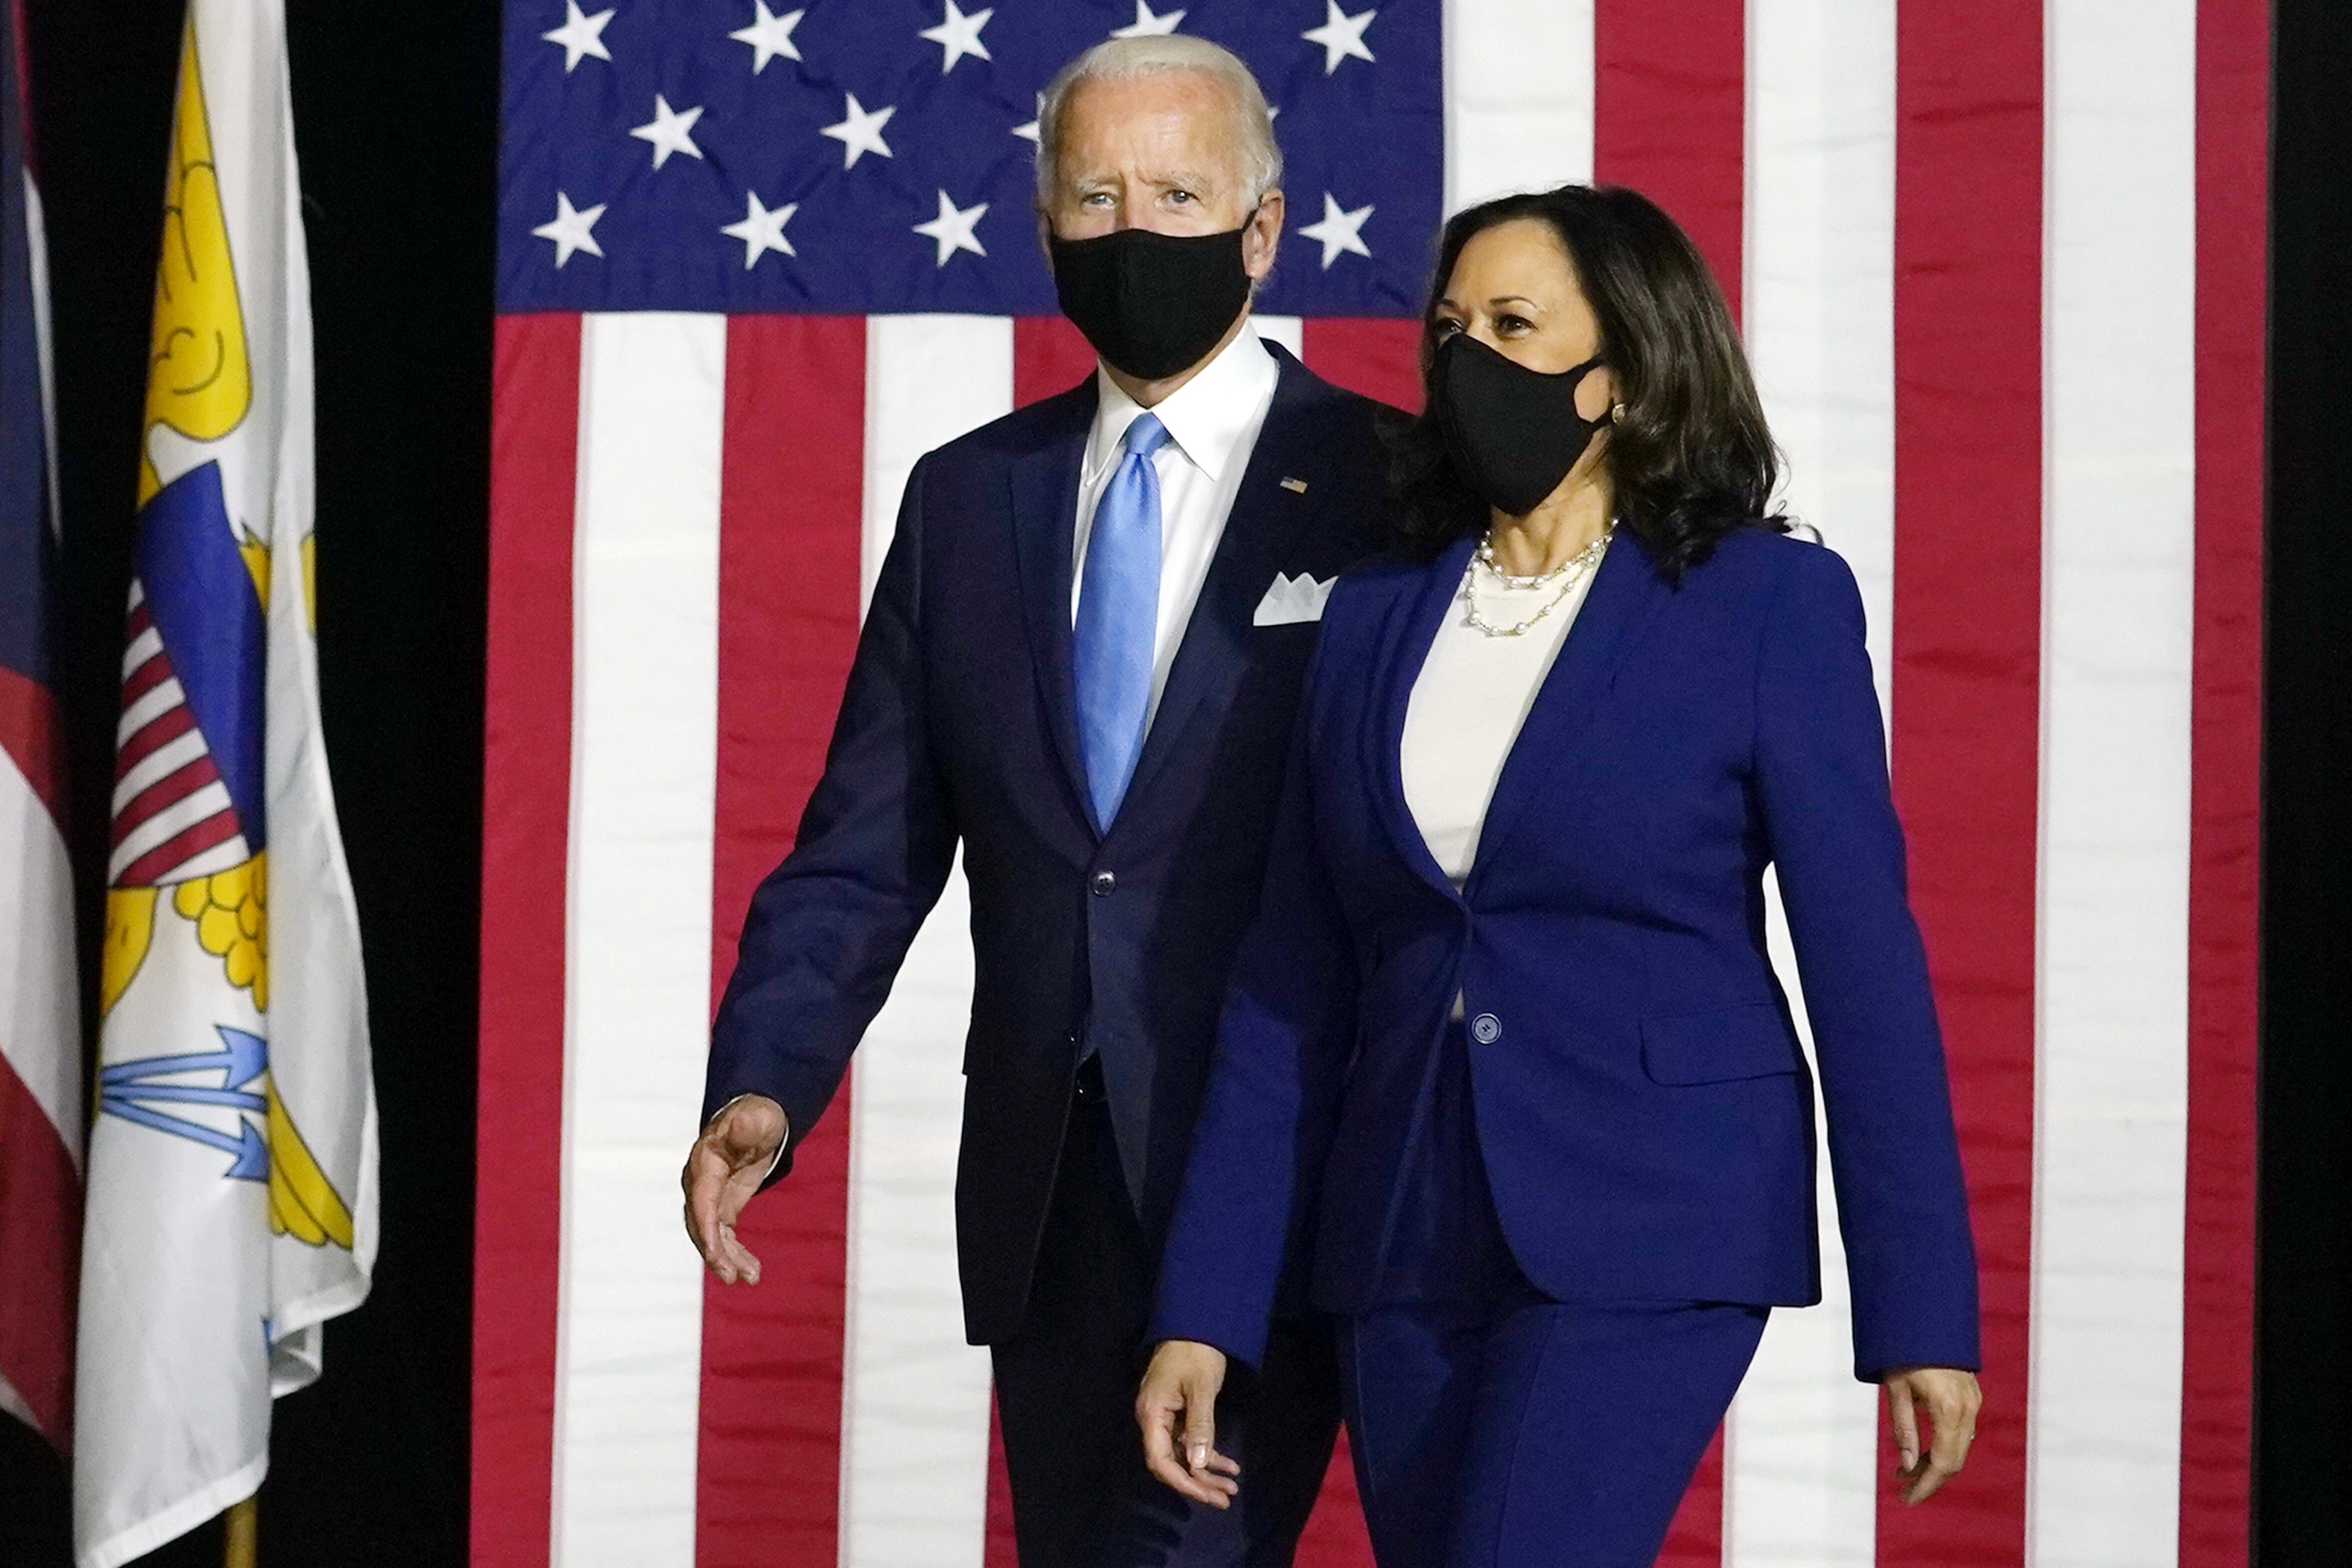 Joe Biden and Kamala Harris arrive to speak at a news conference on August 12 in Wilmington, Delaware. 